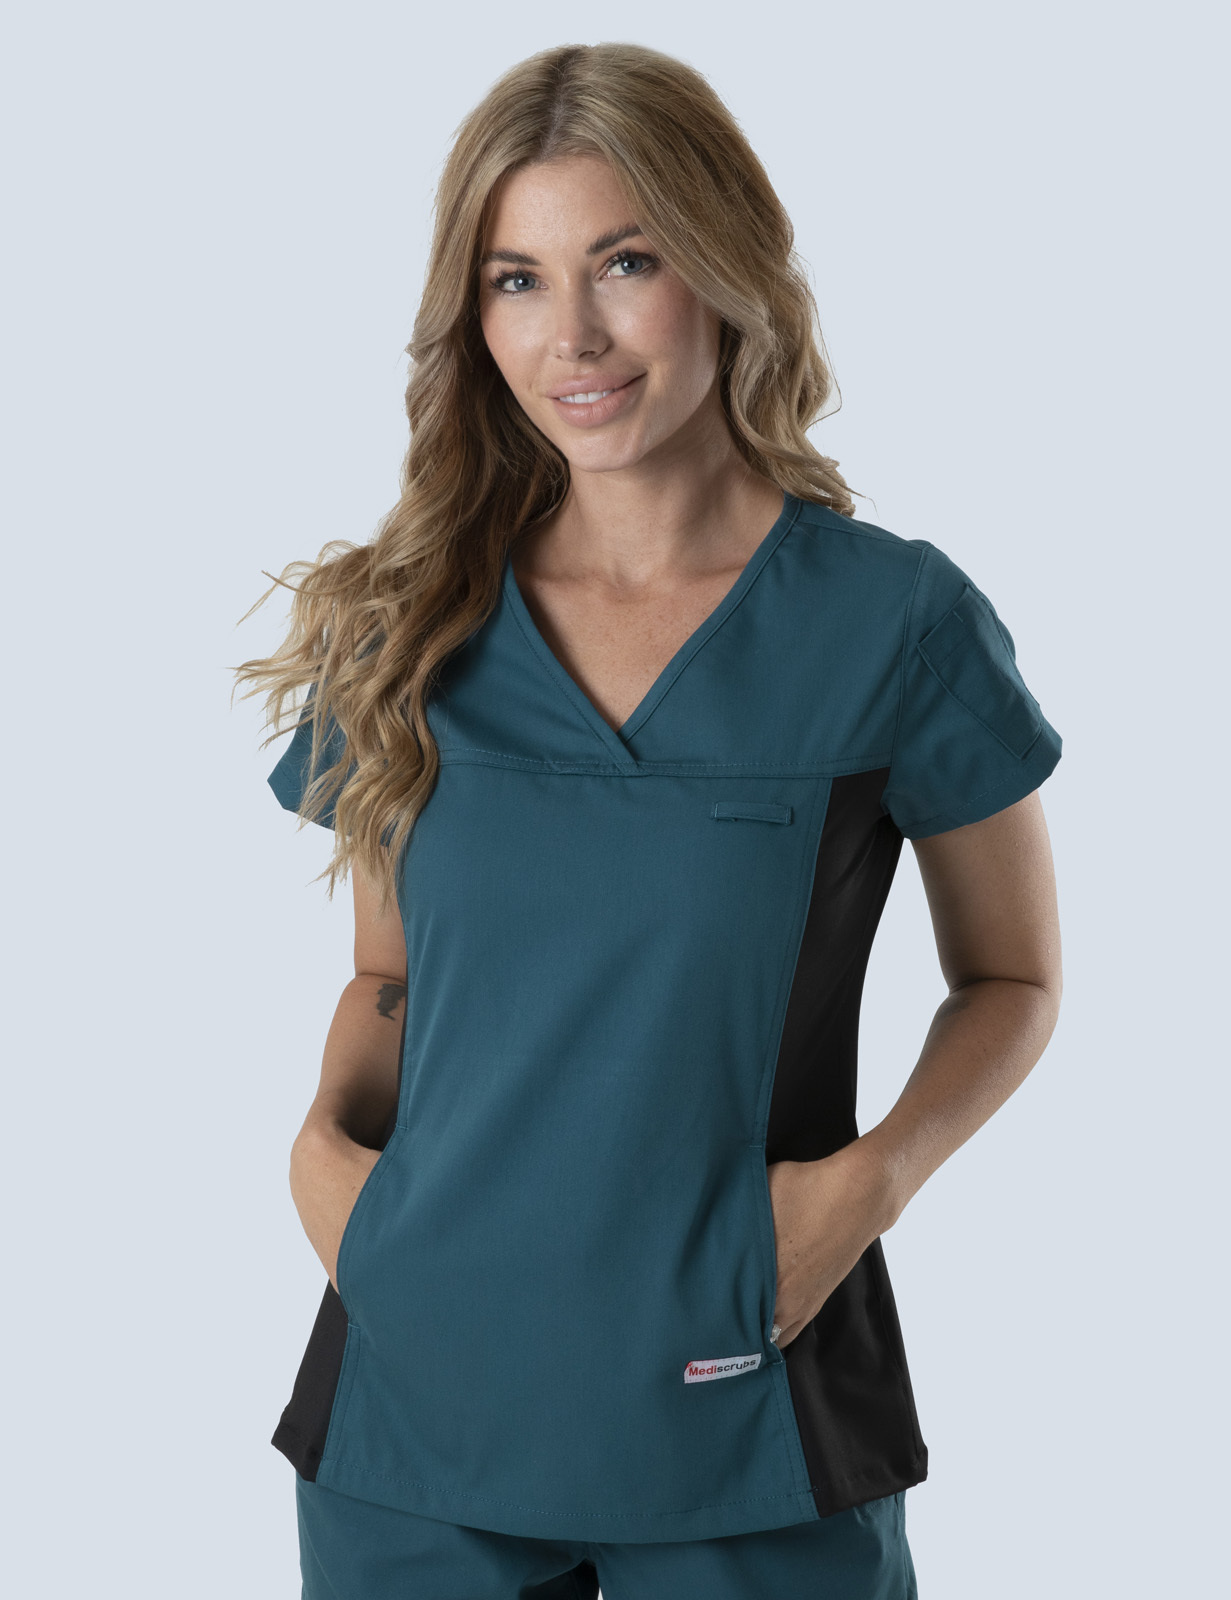 Gladstone Hospital - Medical Surgical (Women's Fit Spandex Scrub Top and Cargo Pants in Caribbean incl Logos)